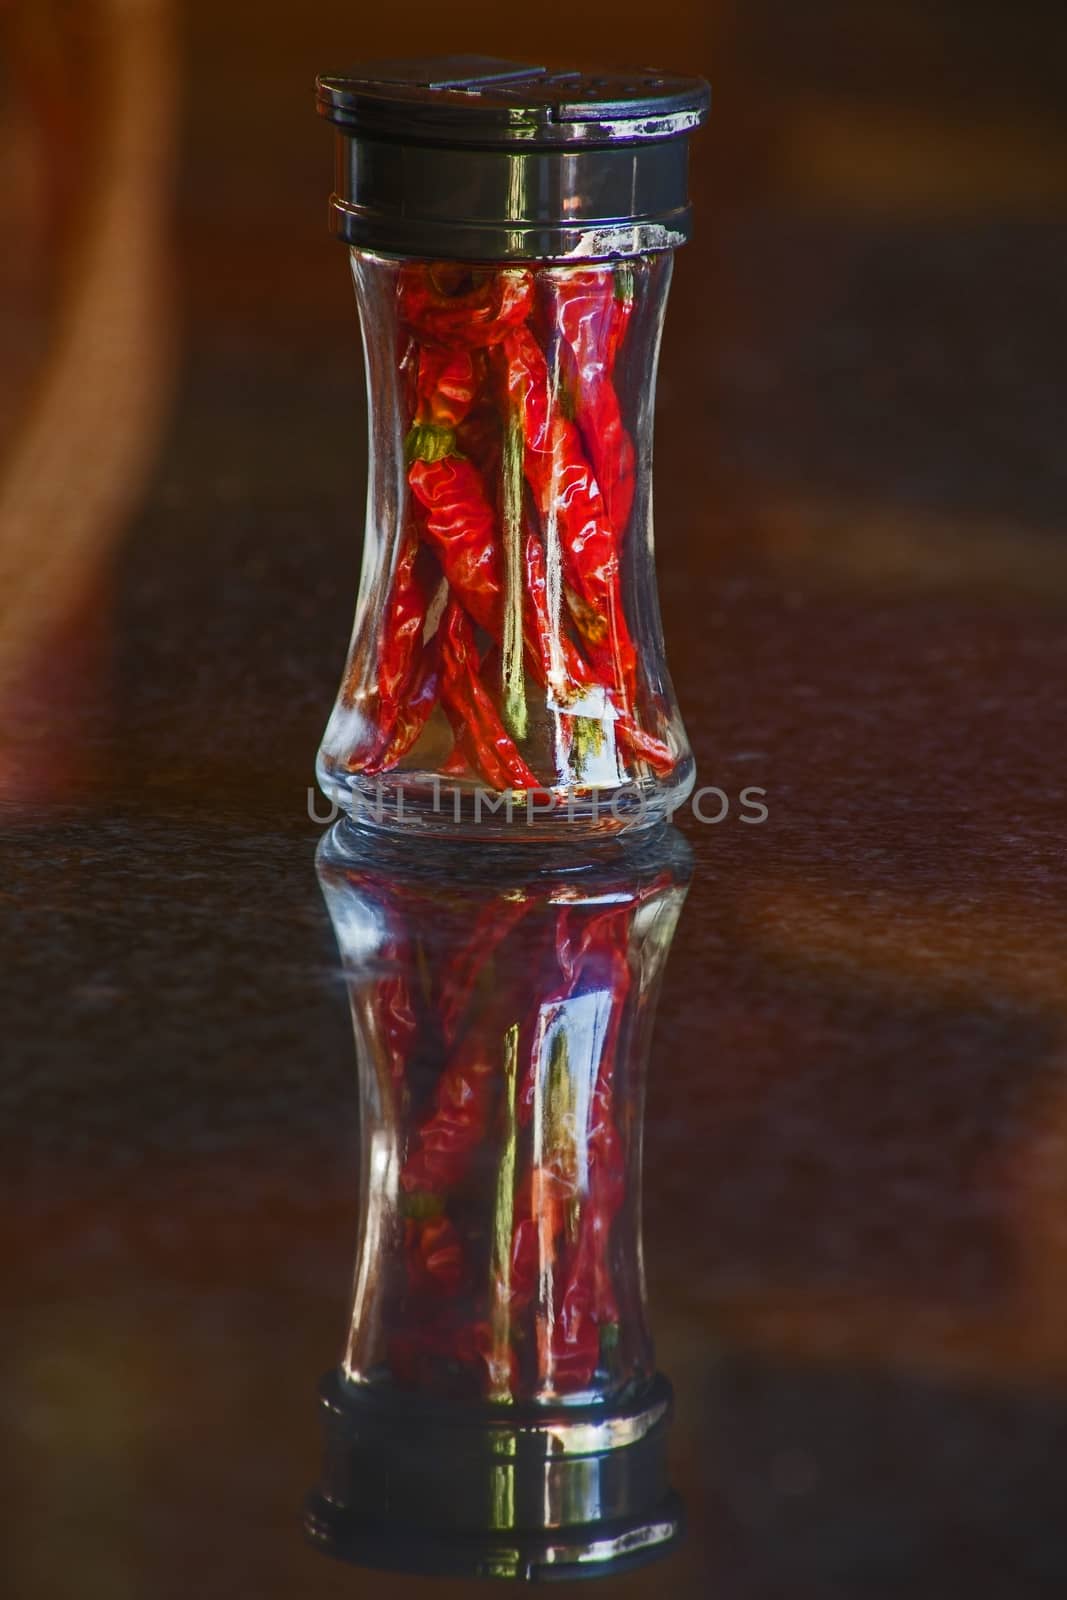 A spice bottle with dried red hot chili 6494 by kobus_peche